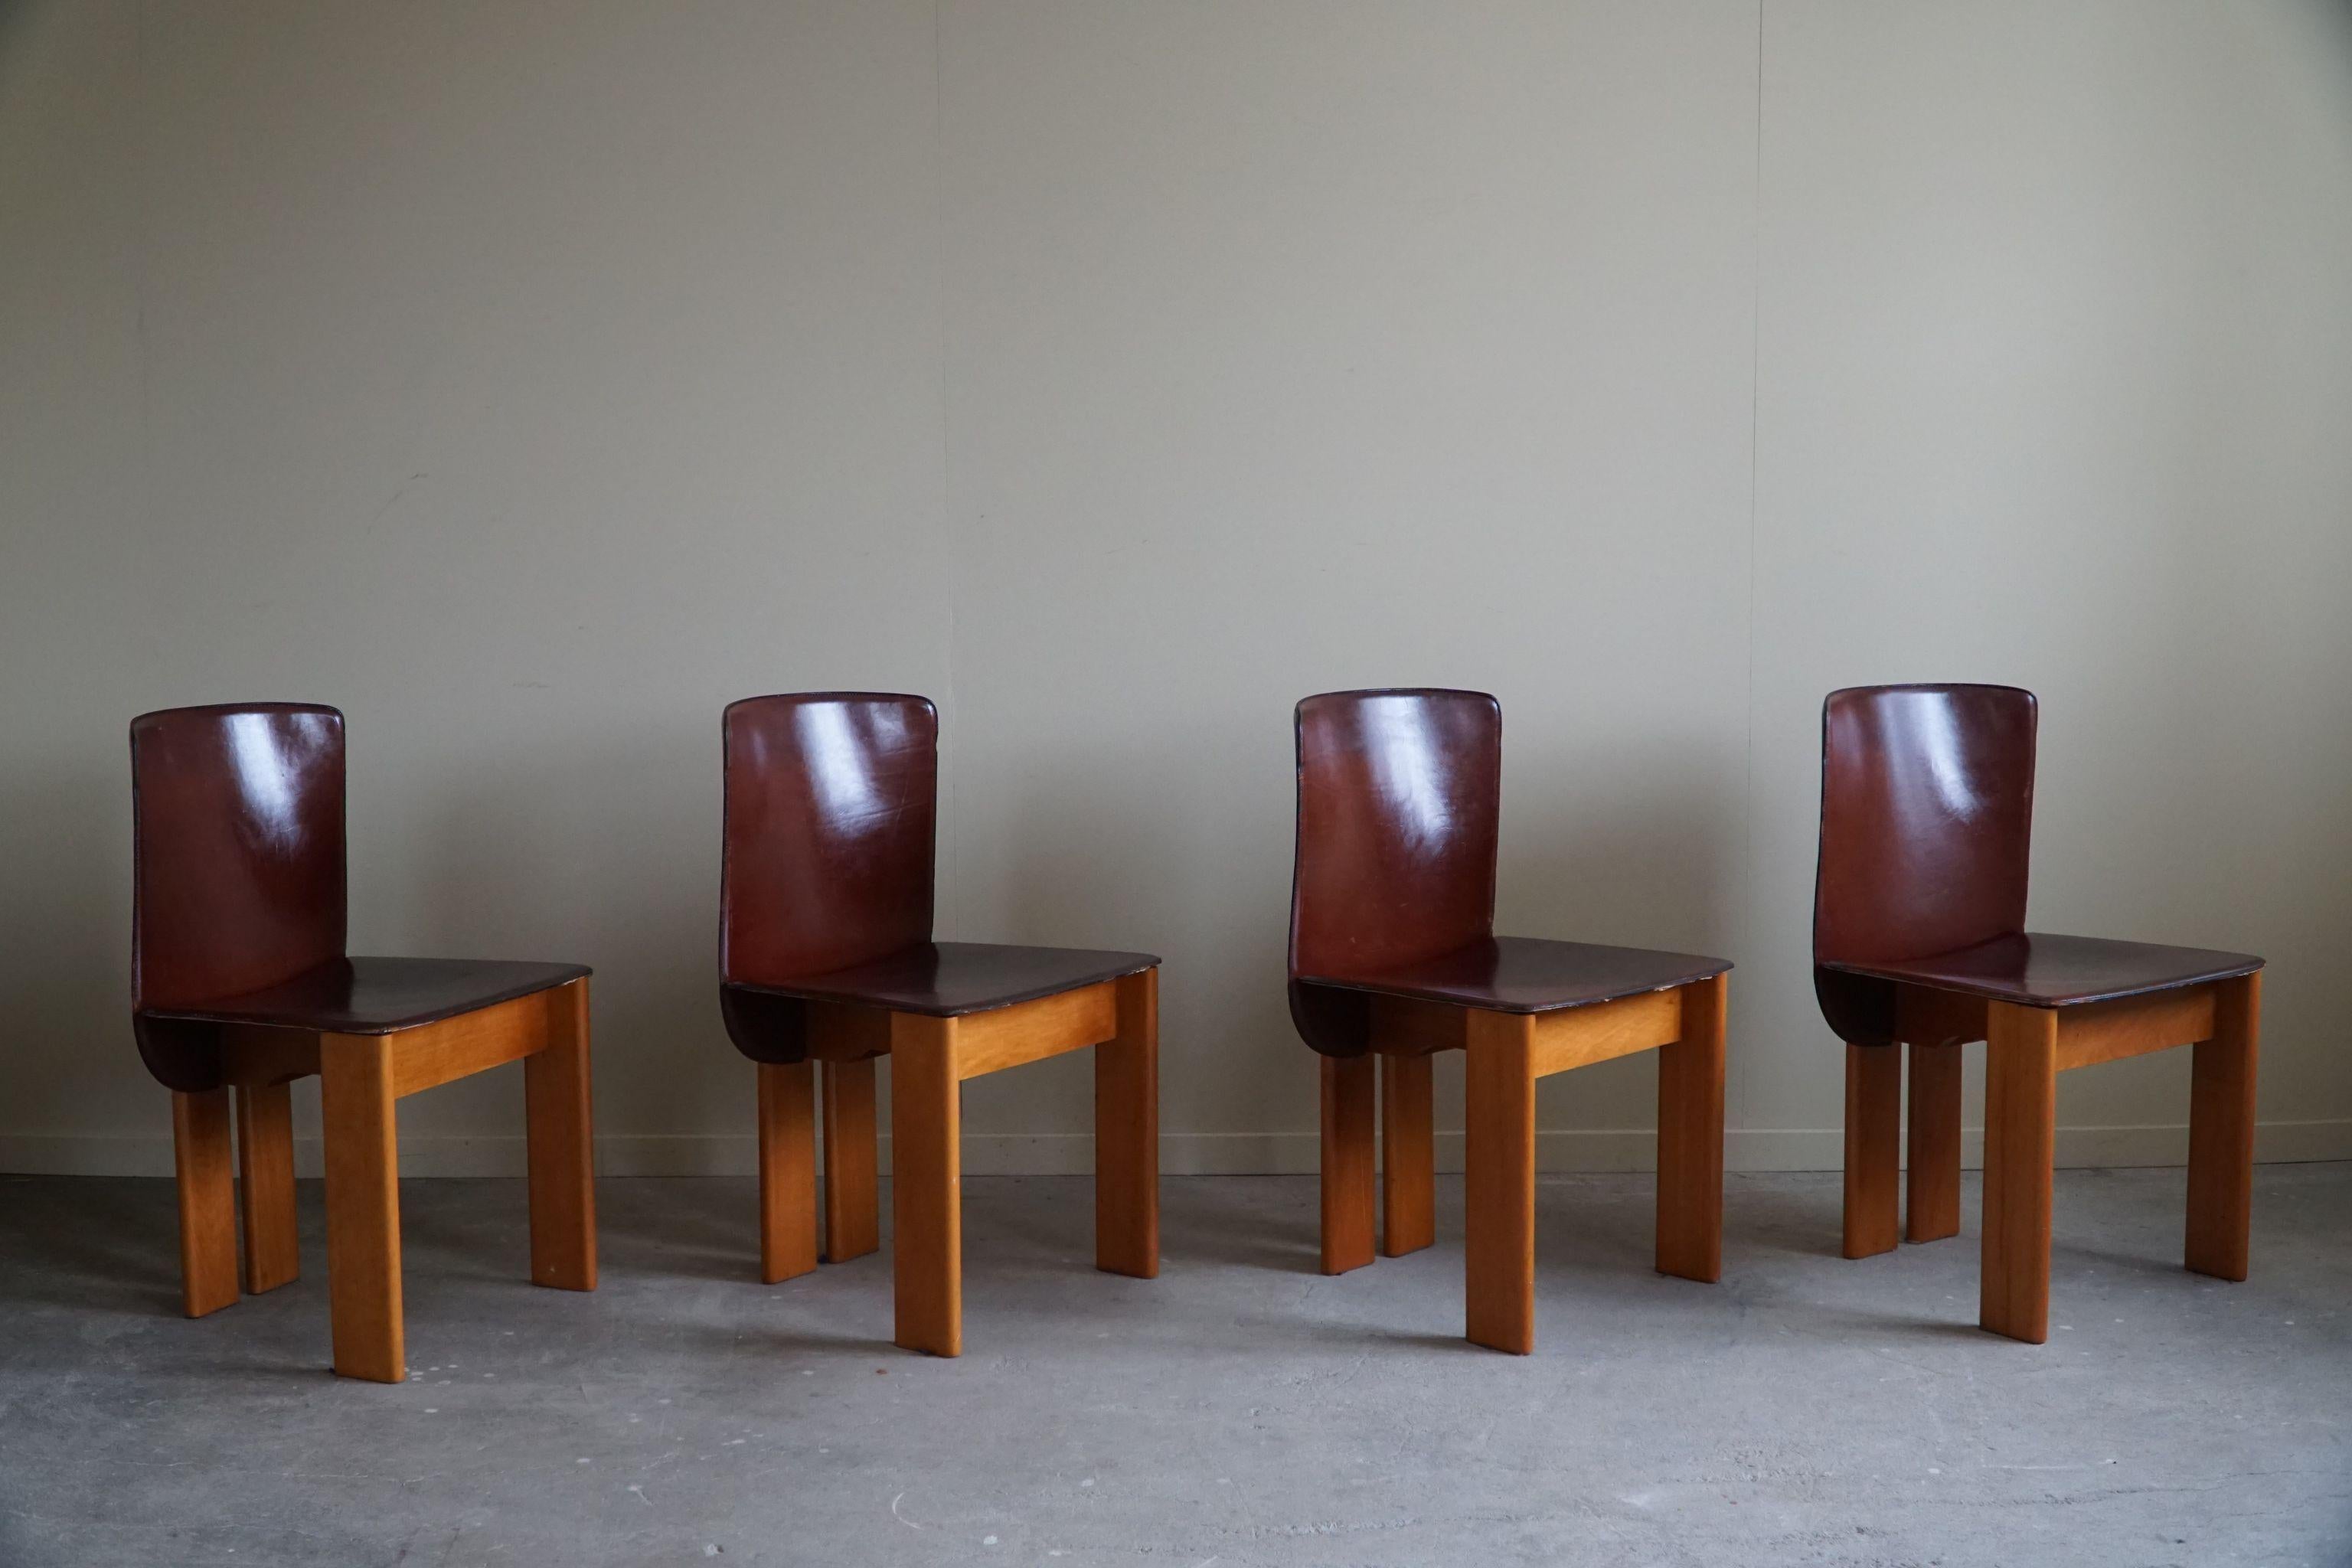 An amazing set of 4 dining chairs in a deep brown colored leather with a solid wooden frame. Made in Italy, in the style of the Italian designer Tobia Scarpa. Made in the 1960-1970s.

Such beautiful lines and a warm patina that complement the